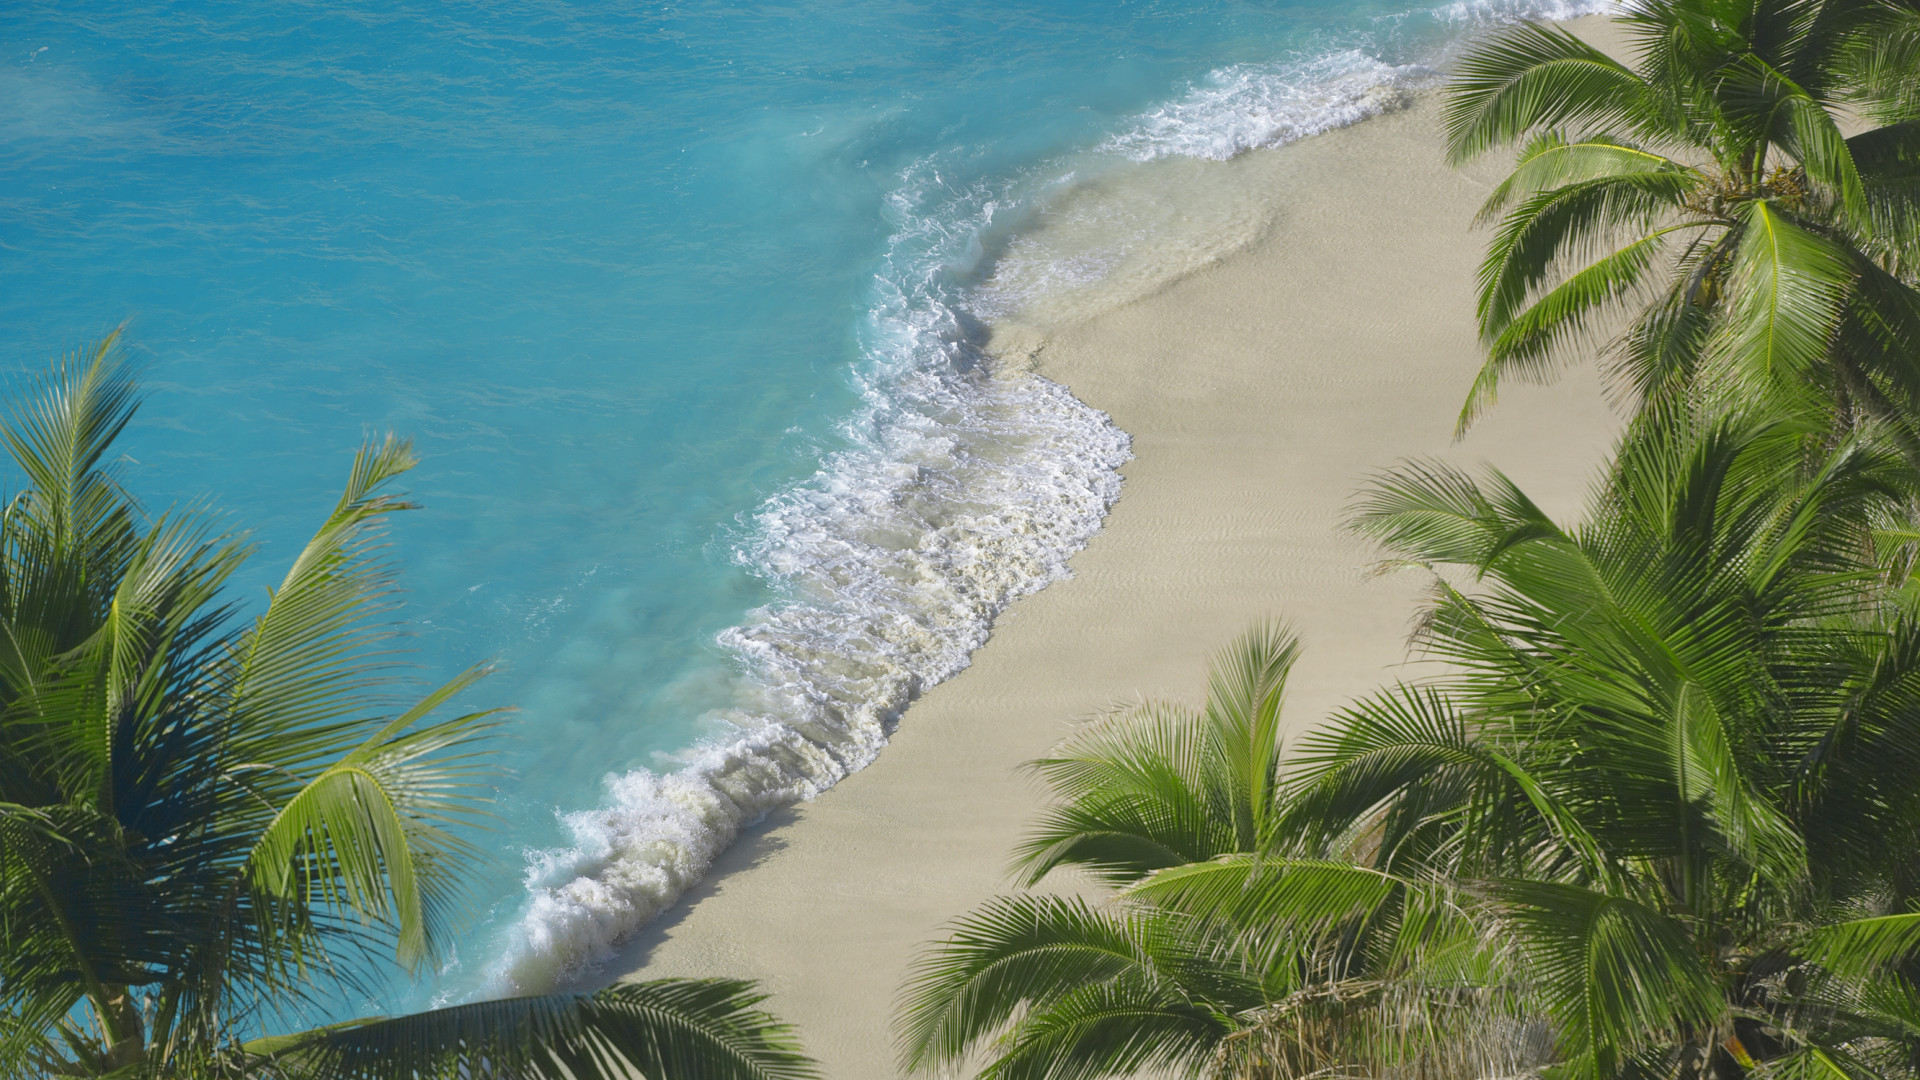 Waves crashing on the beach at Fregate Island Private in Seychelles